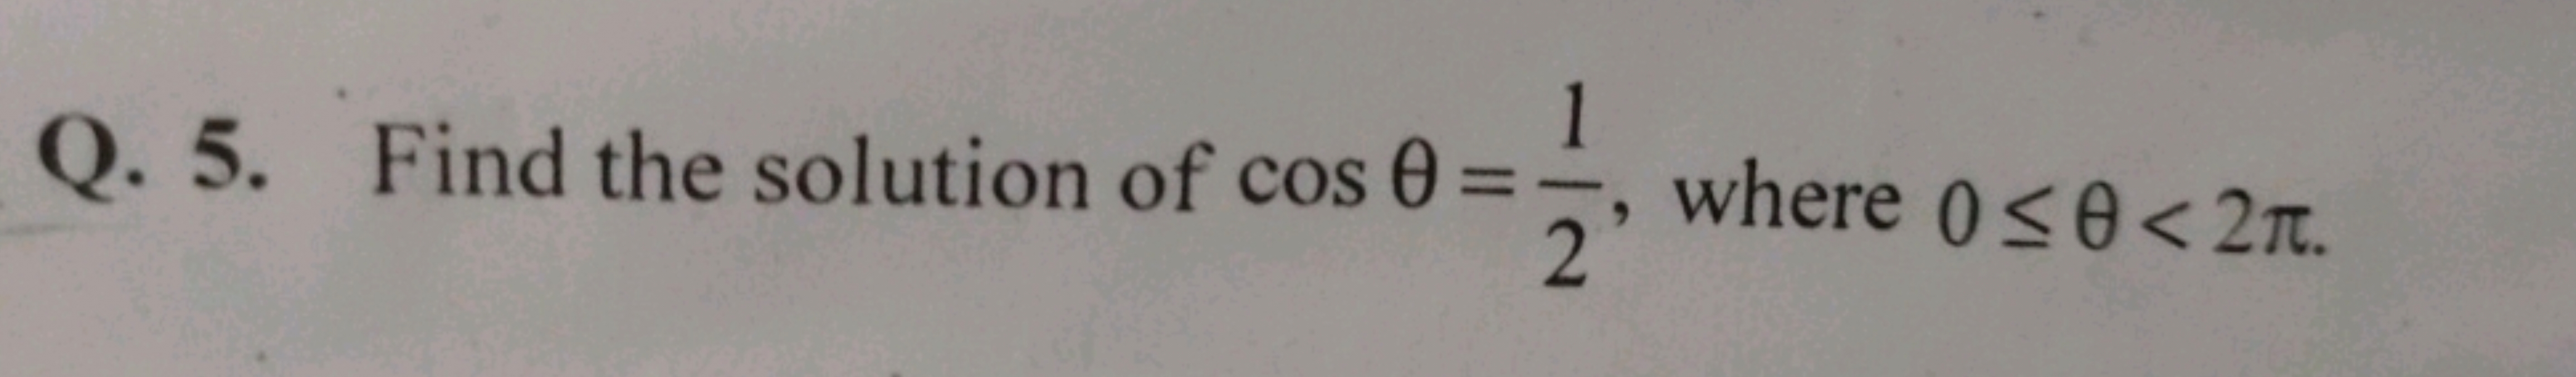 Q. 5. Find the solution of cosθ=21​, where 0≤θ<2π.
